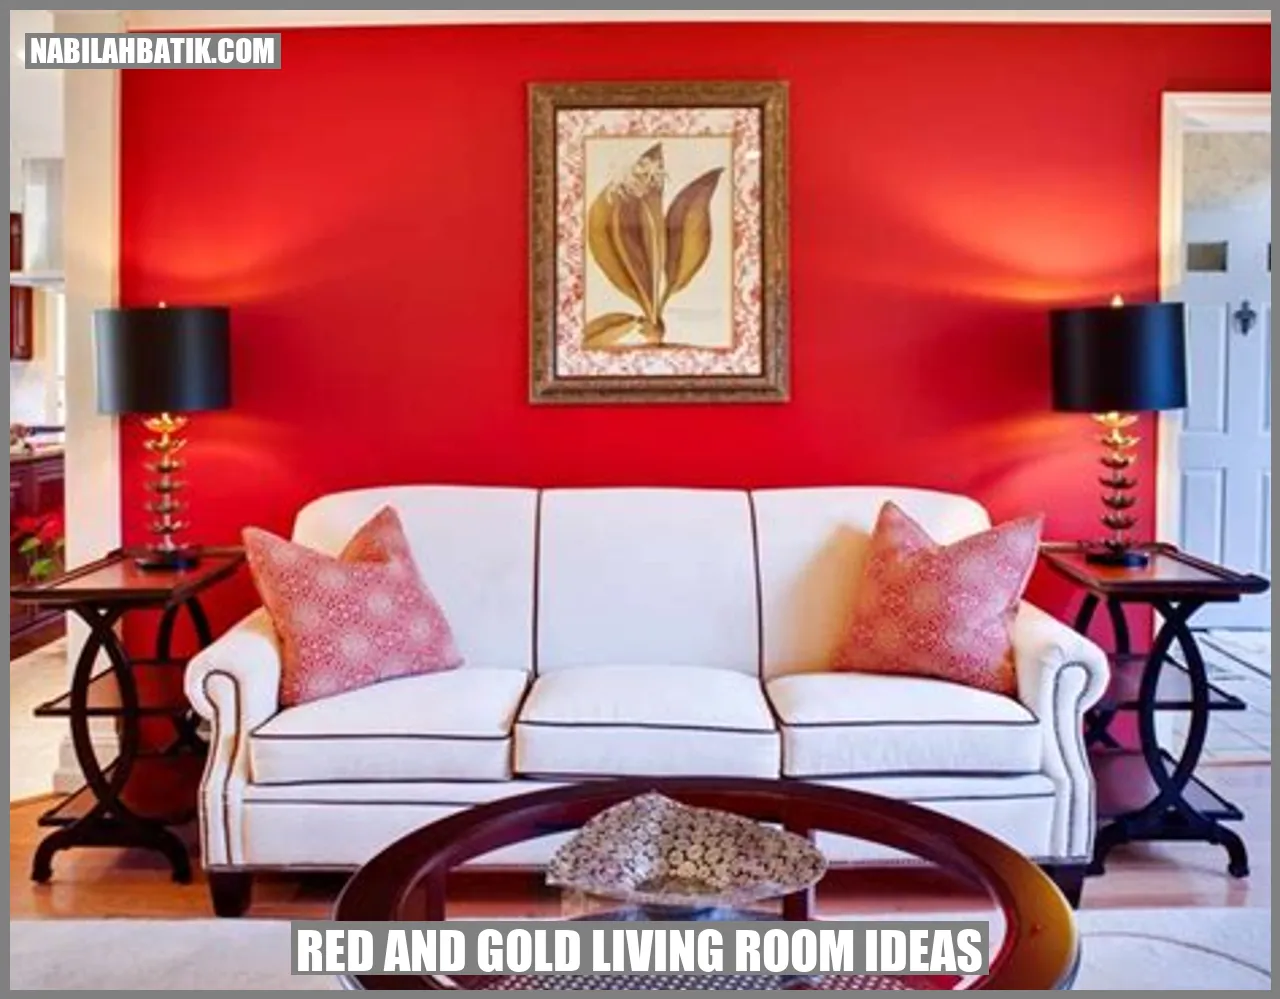 Red and Gold Living Room Ideas